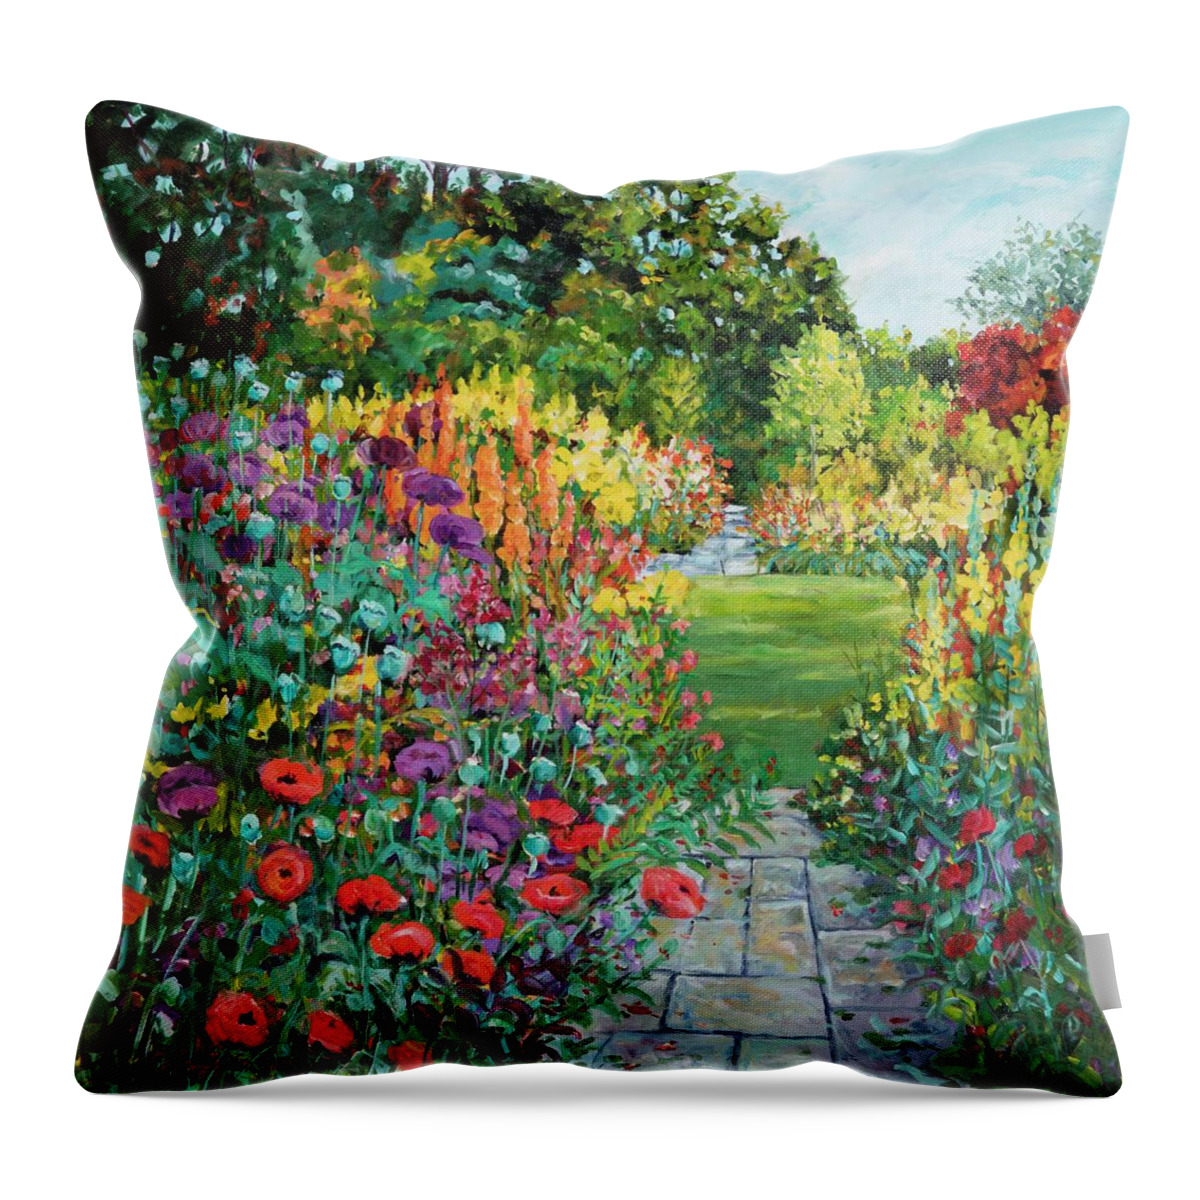 Flowers Throw Pillow featuring the painting Landscape with Poppies by Ingrid Dohm